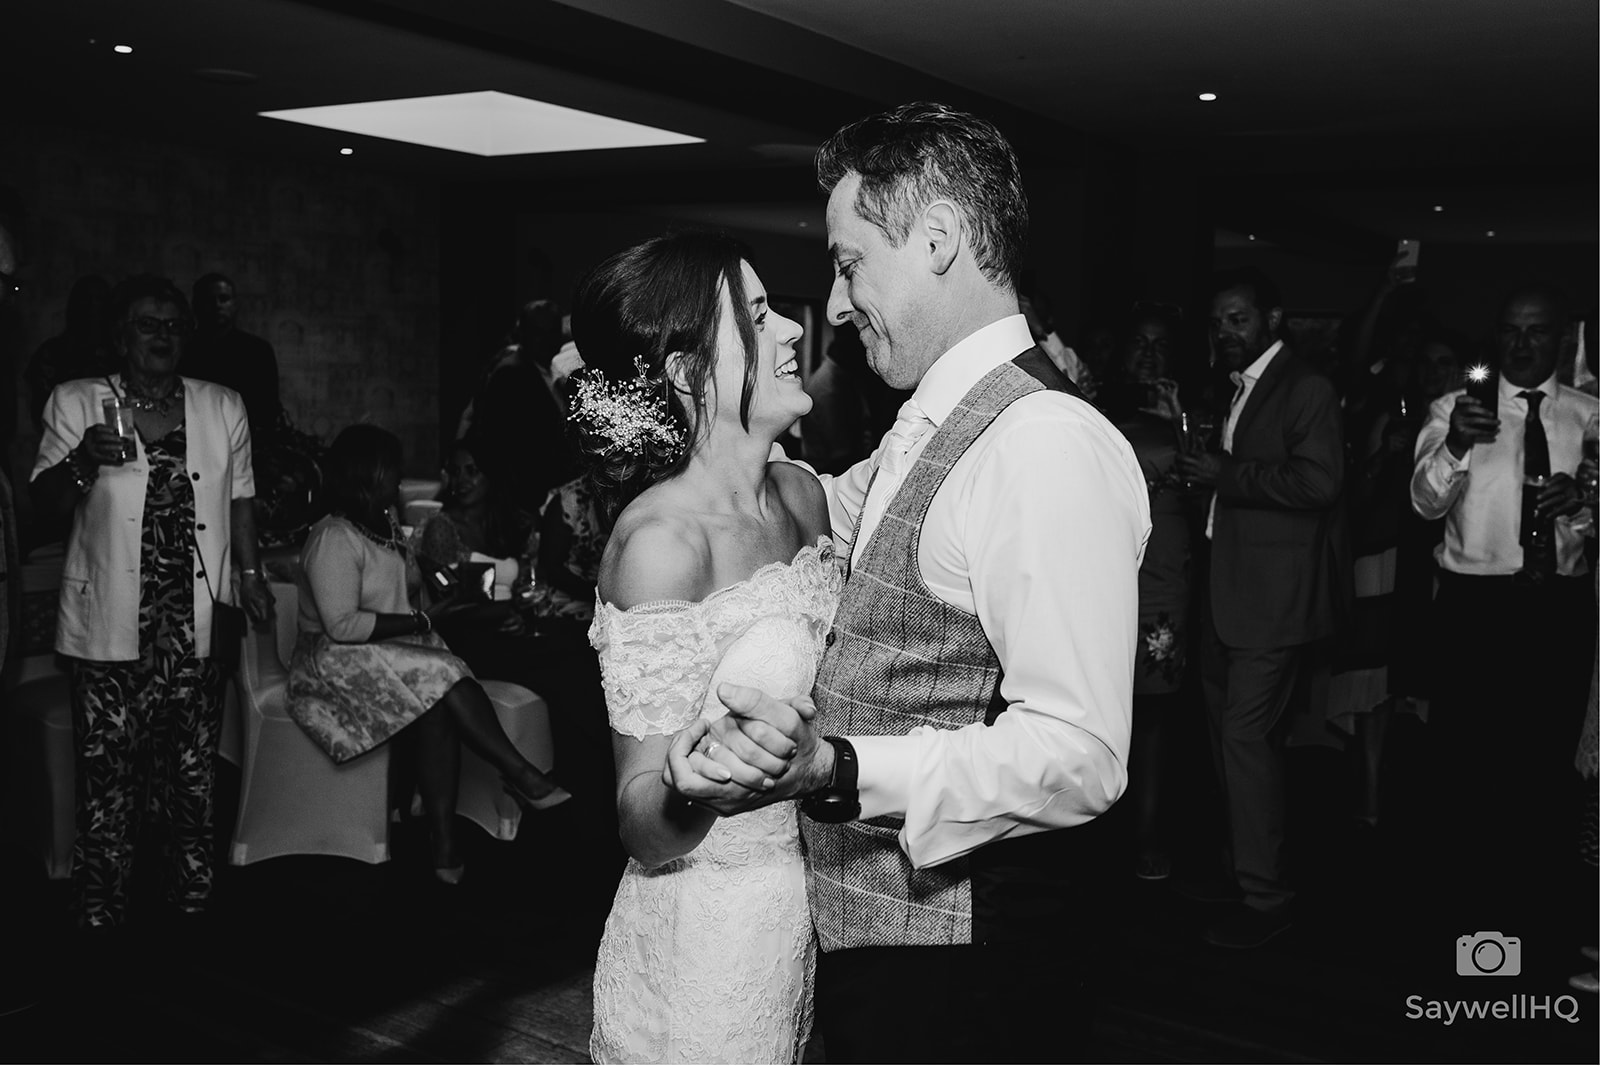 The Chequers Inn Wedding Photography - bride and groom dancing during their first dance